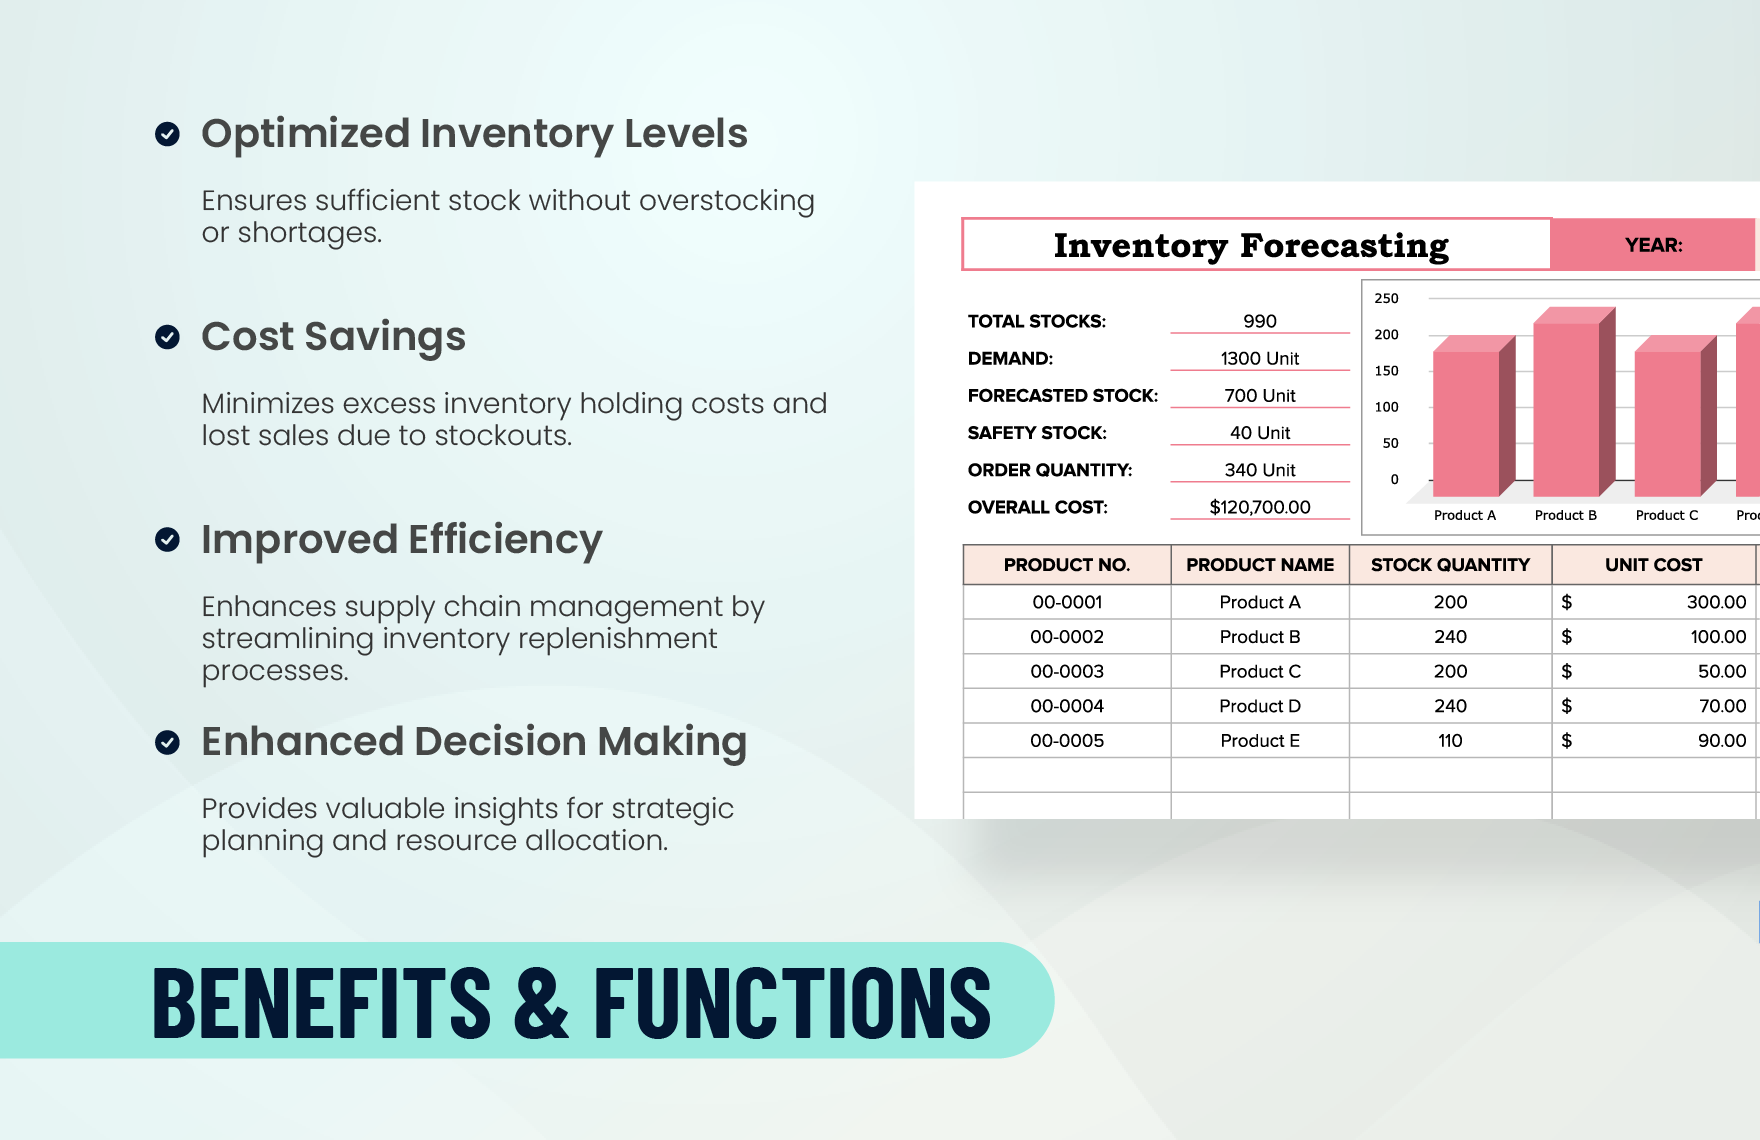 Inventory Forecasting Template